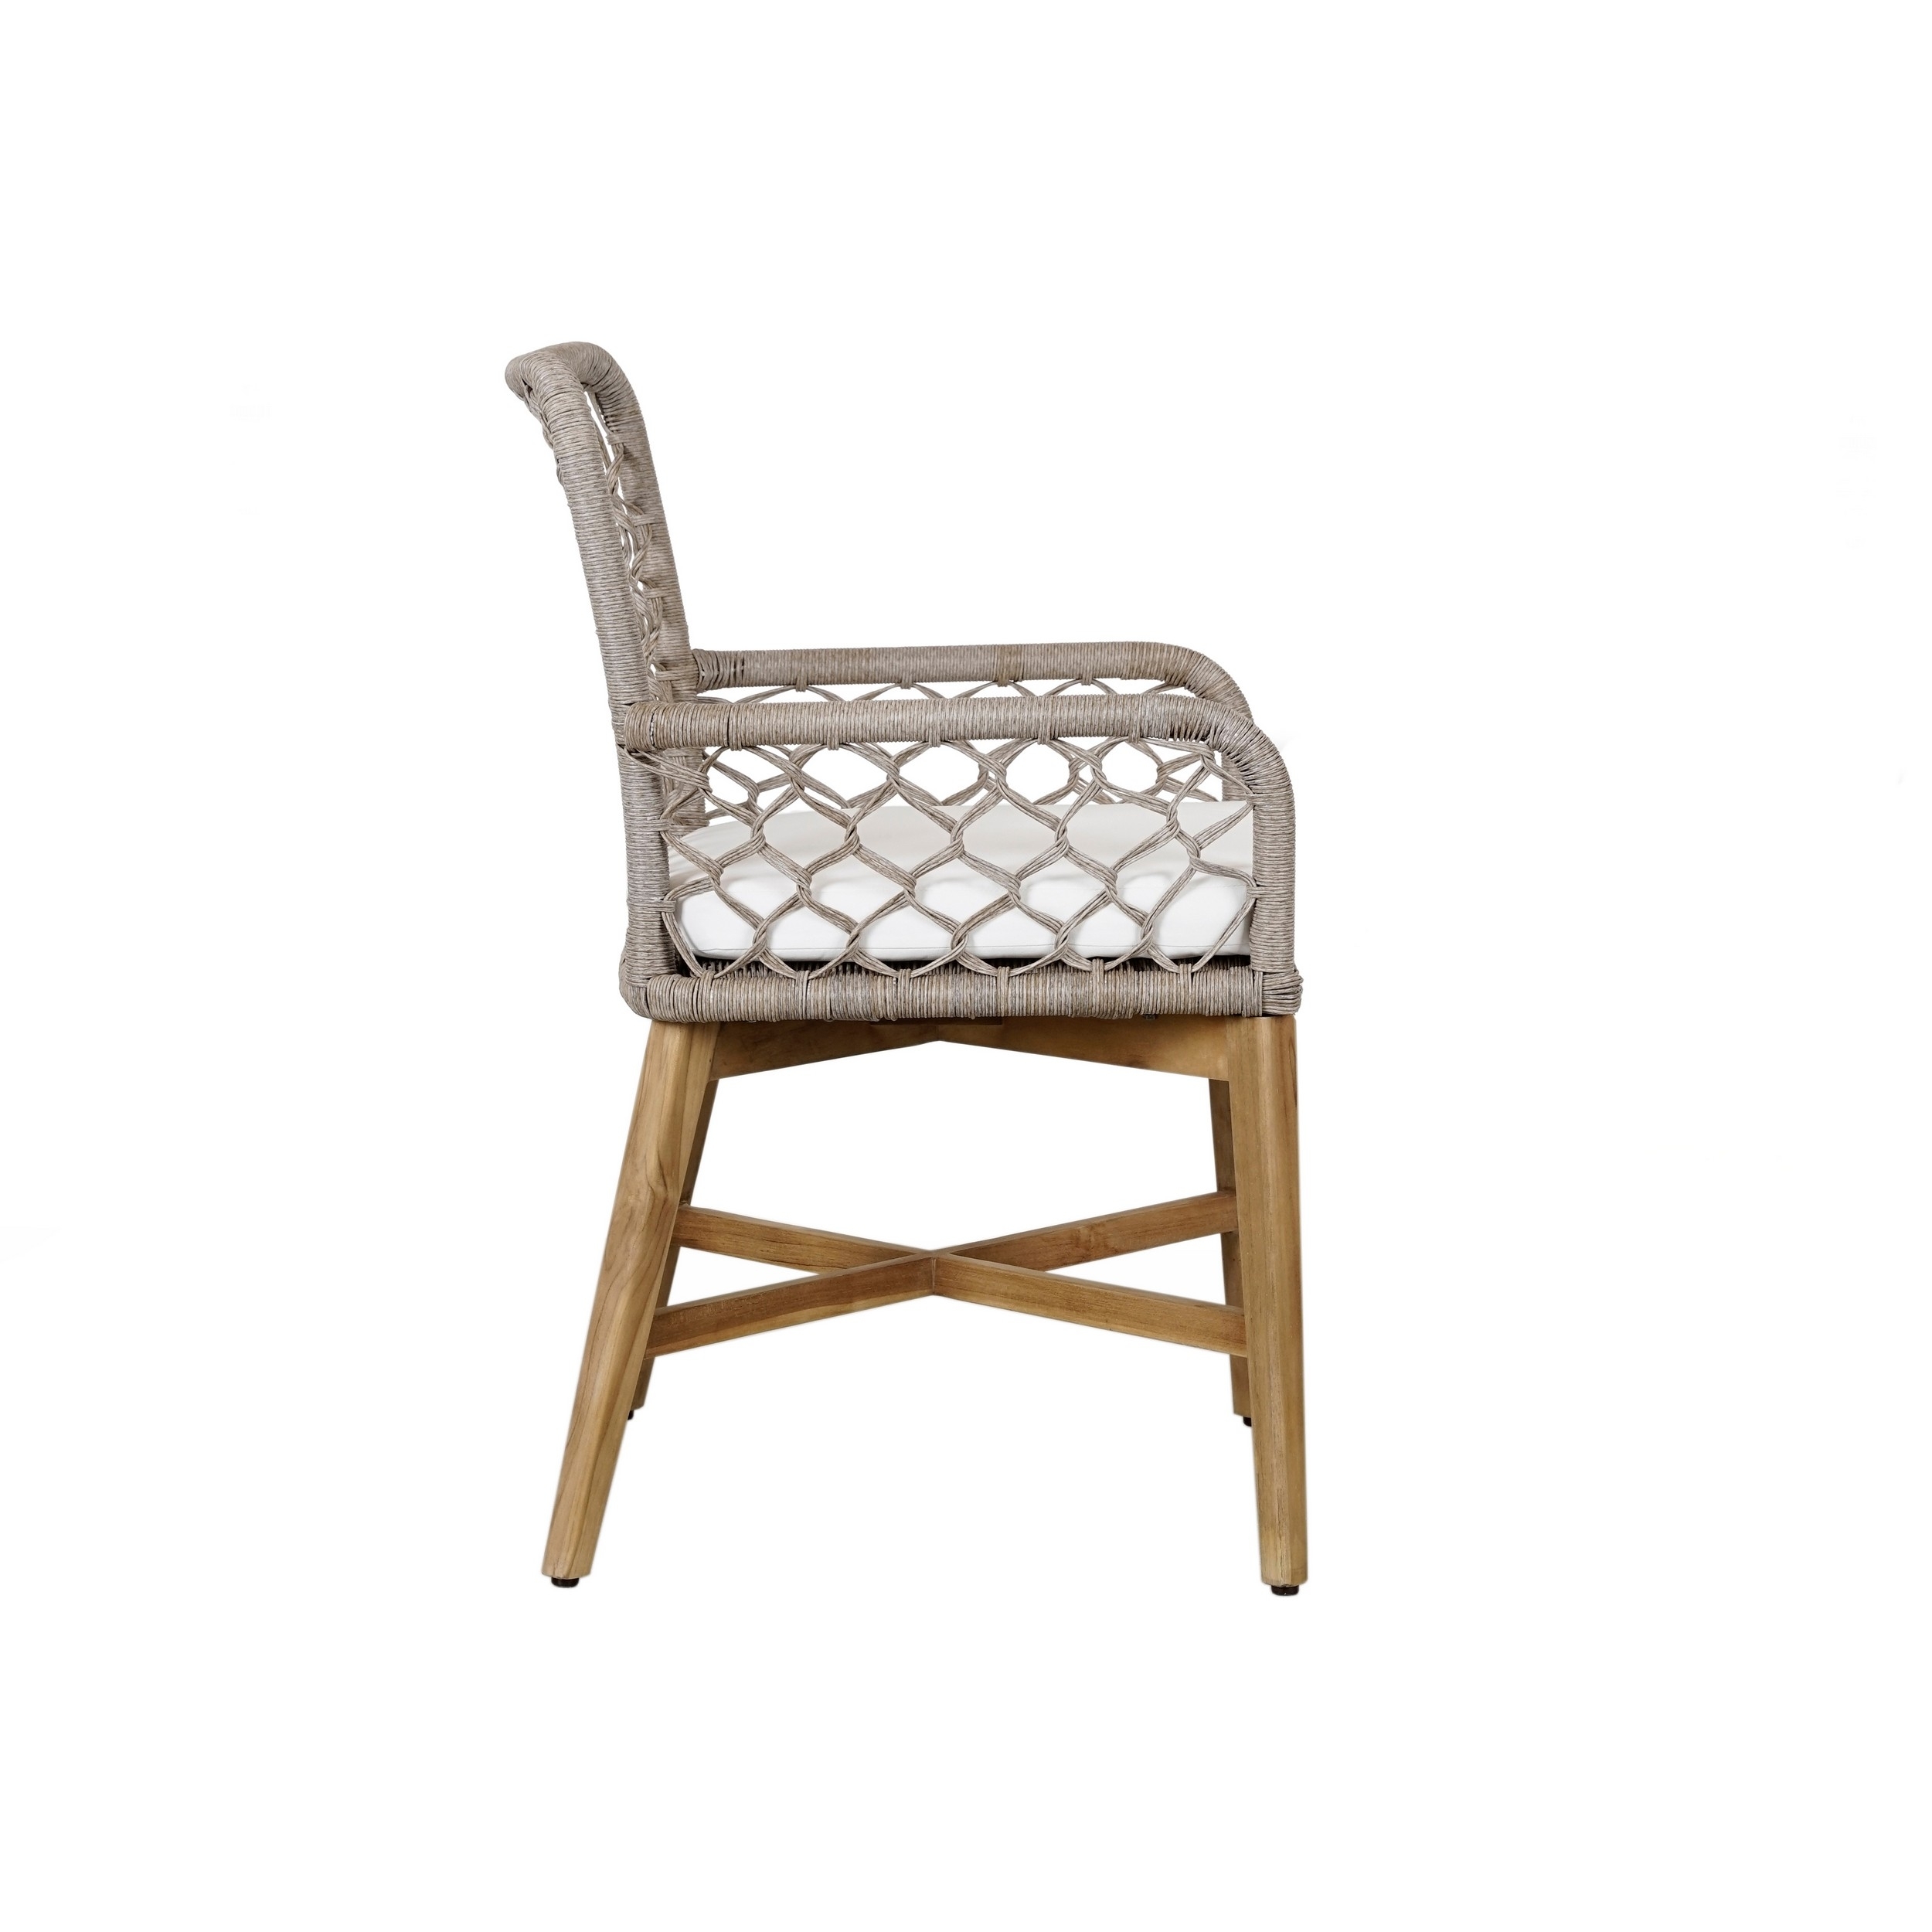 Aok 23 Inch Teak Outdoor Dining Chair, Gray Woven Rope, Curved Back, Brown -Saltoro Sherpi